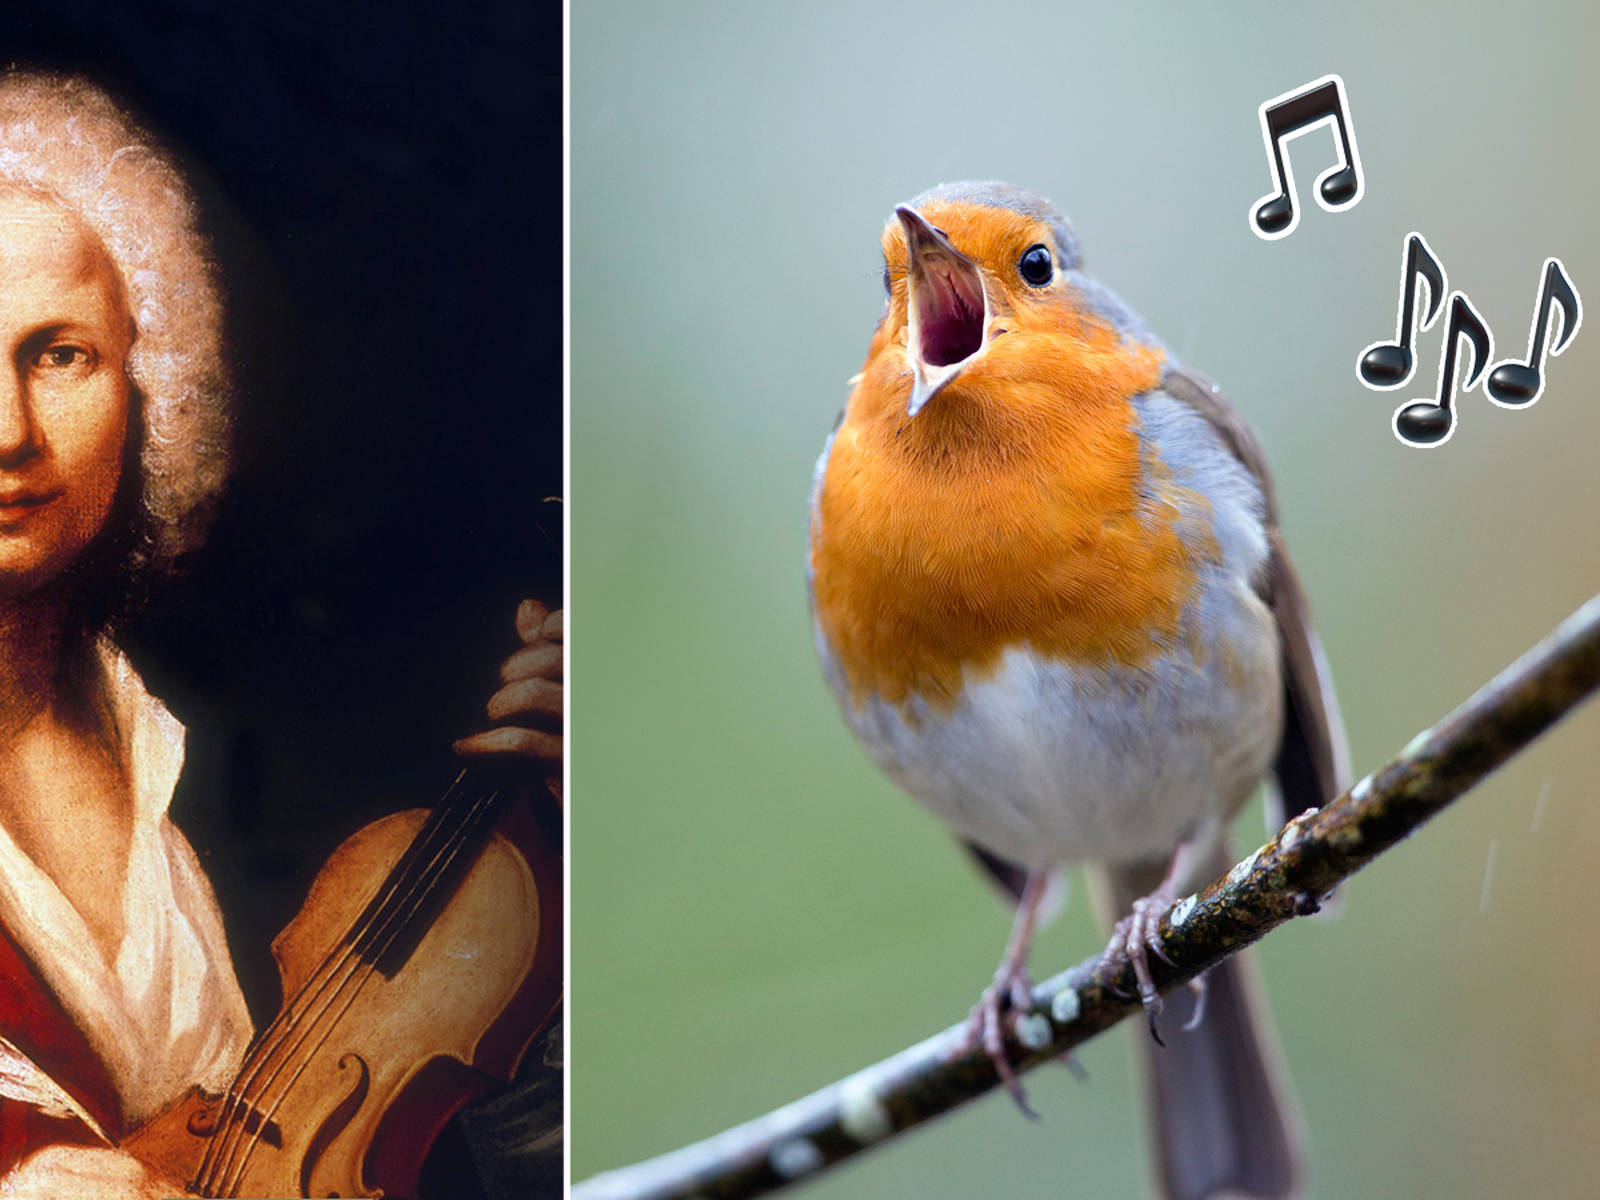 13 pieces of classical music inspired by birdsong - Classic FM